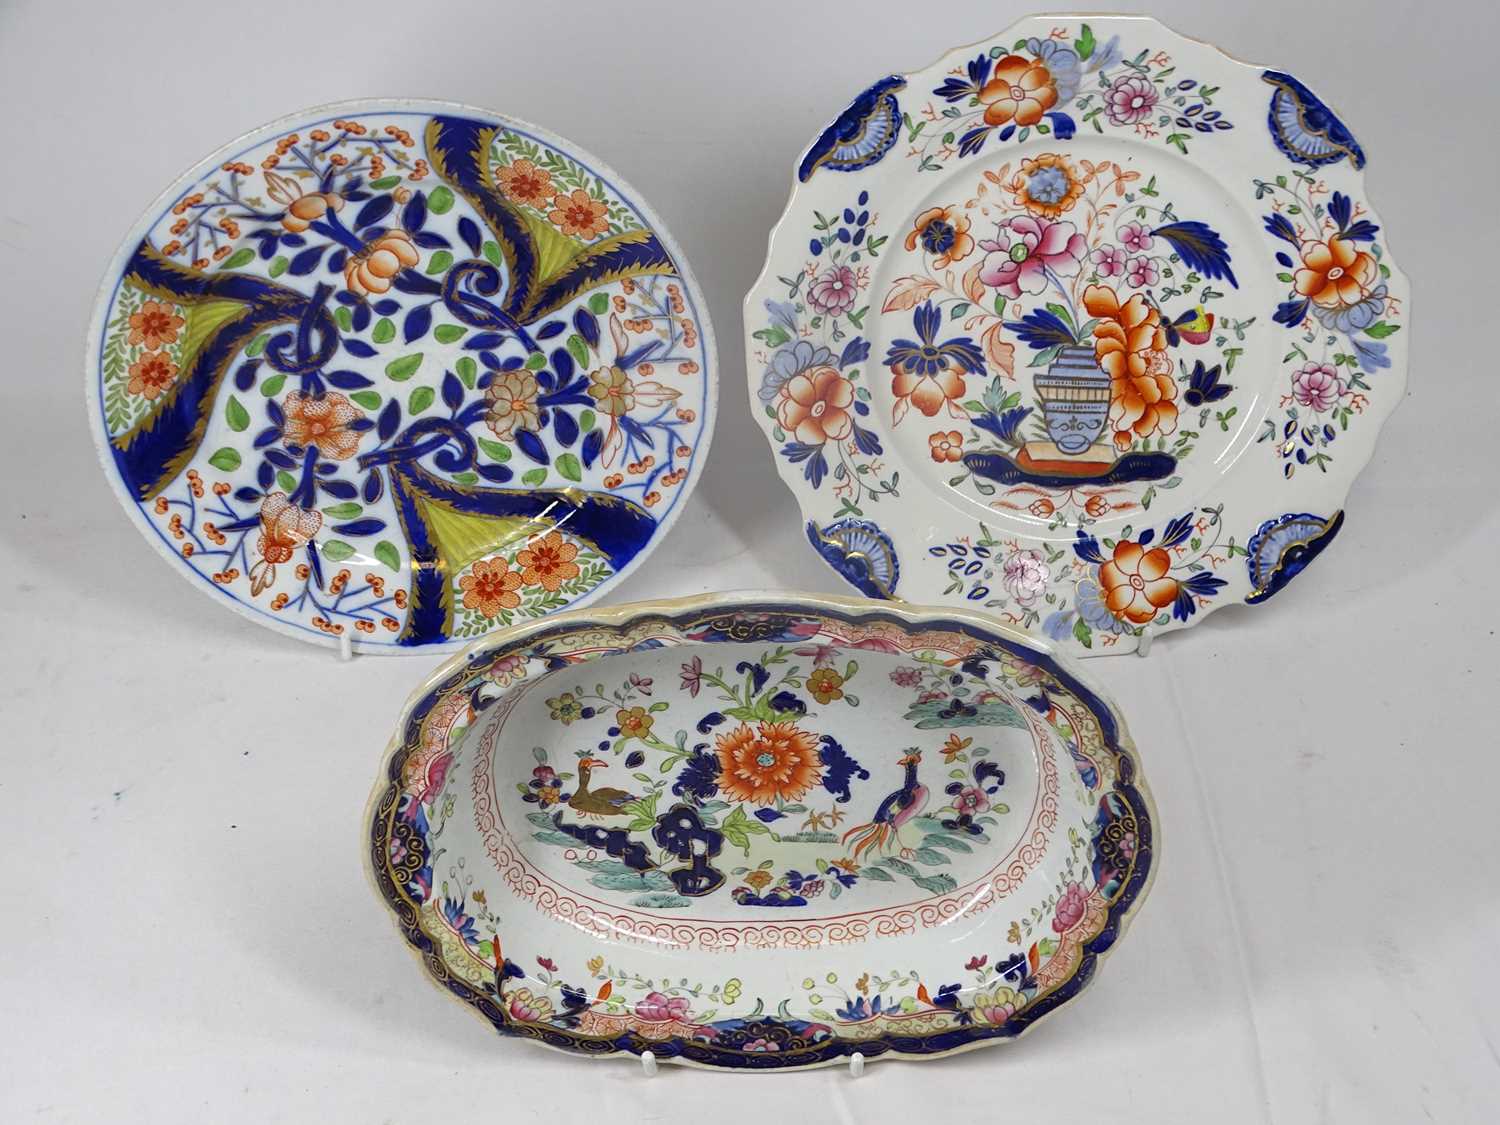 CERAMICS & GLASSWARE - Early 19th Century and later decorative plates etc to including Booths - Image 5 of 5